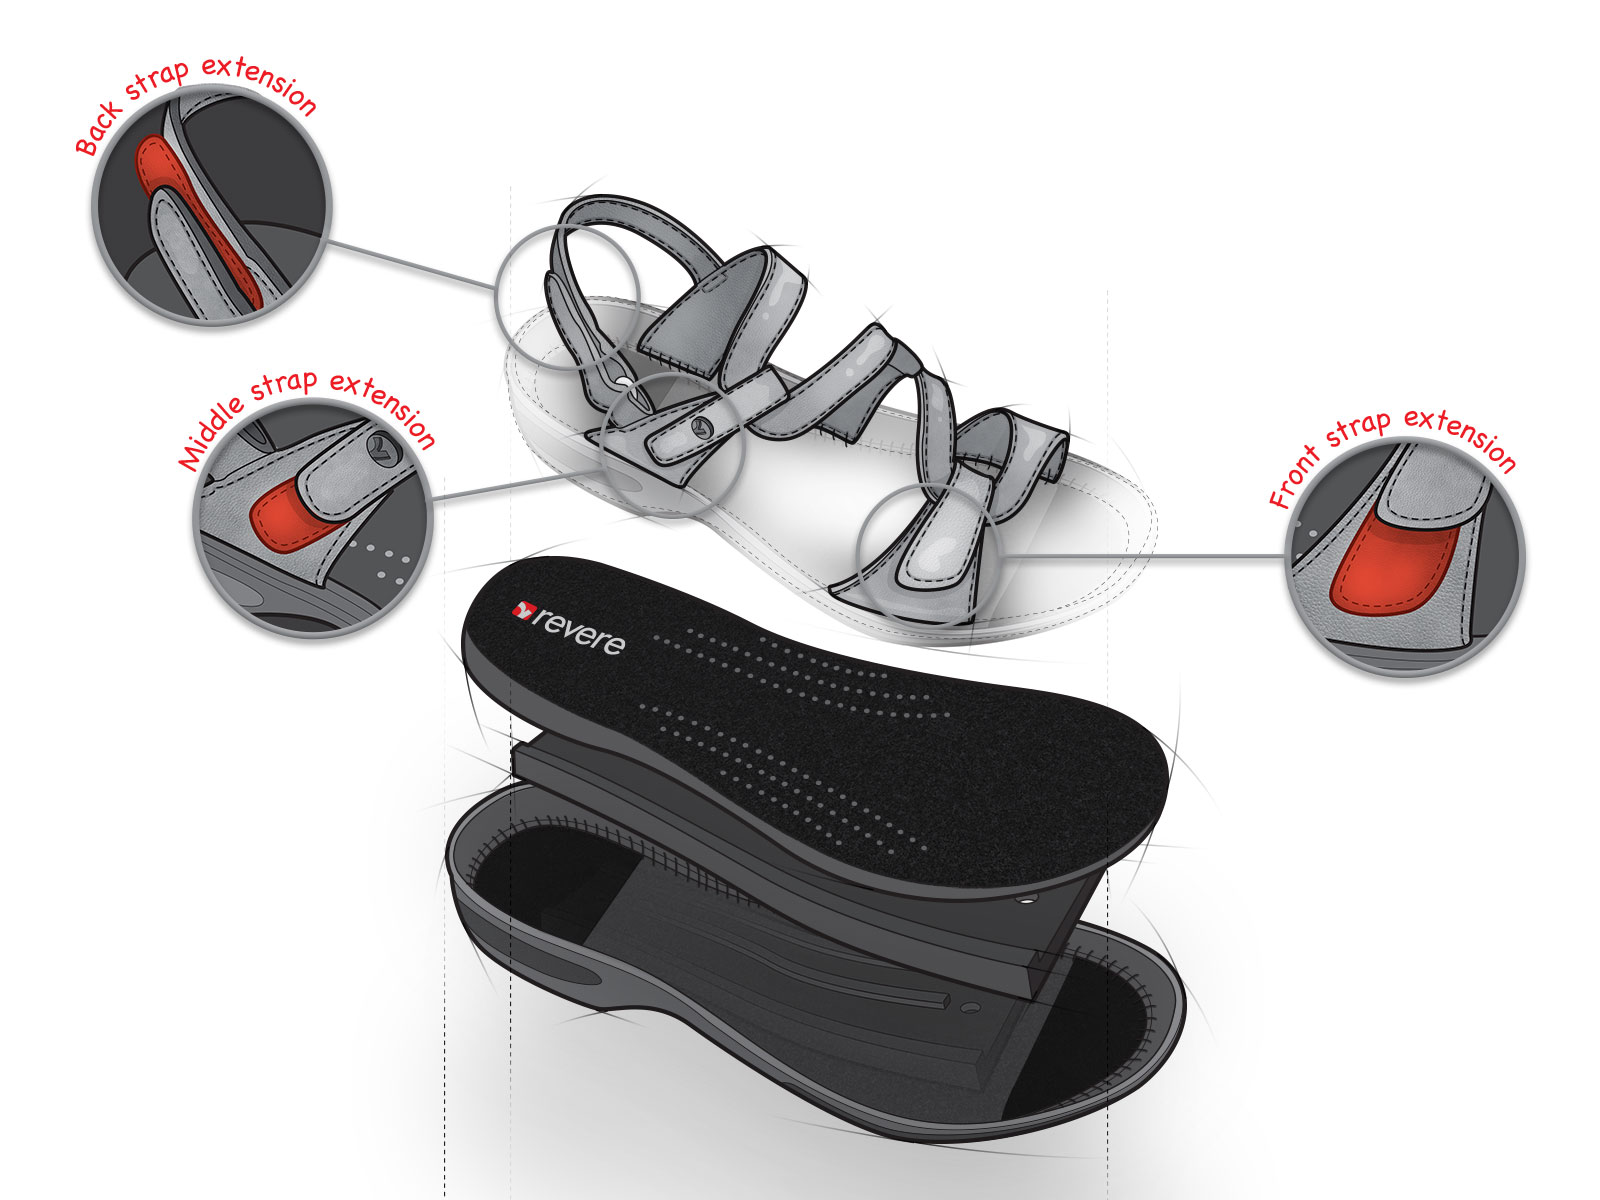 Elevated cutaway technical illustration of medical footware product